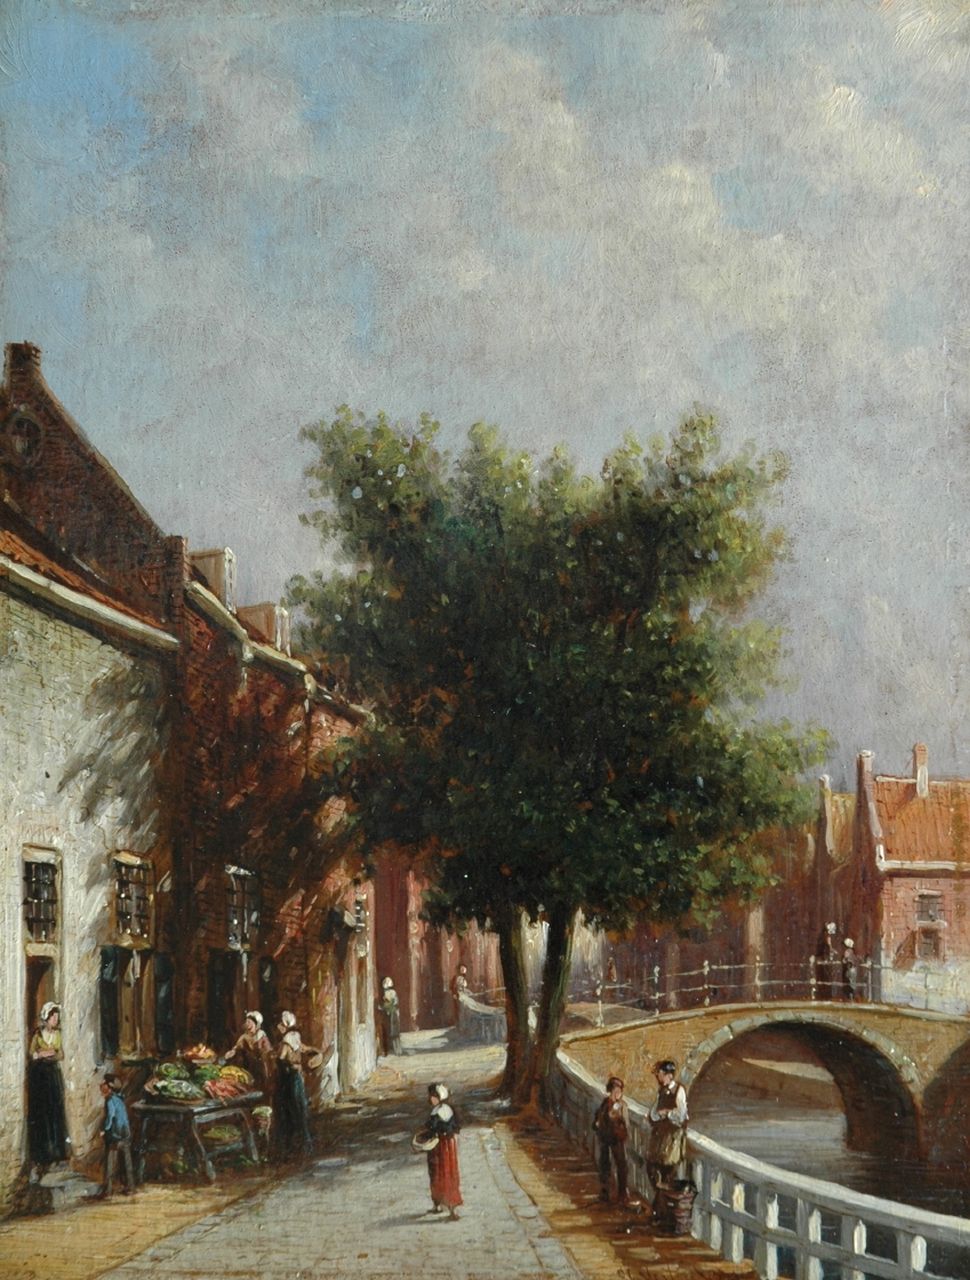 Vertin P.G.  | Petrus Gerardus Vertin, A town view with vegetable stall, oil on panel 25.0 x 19.0 cm, signed r.c.